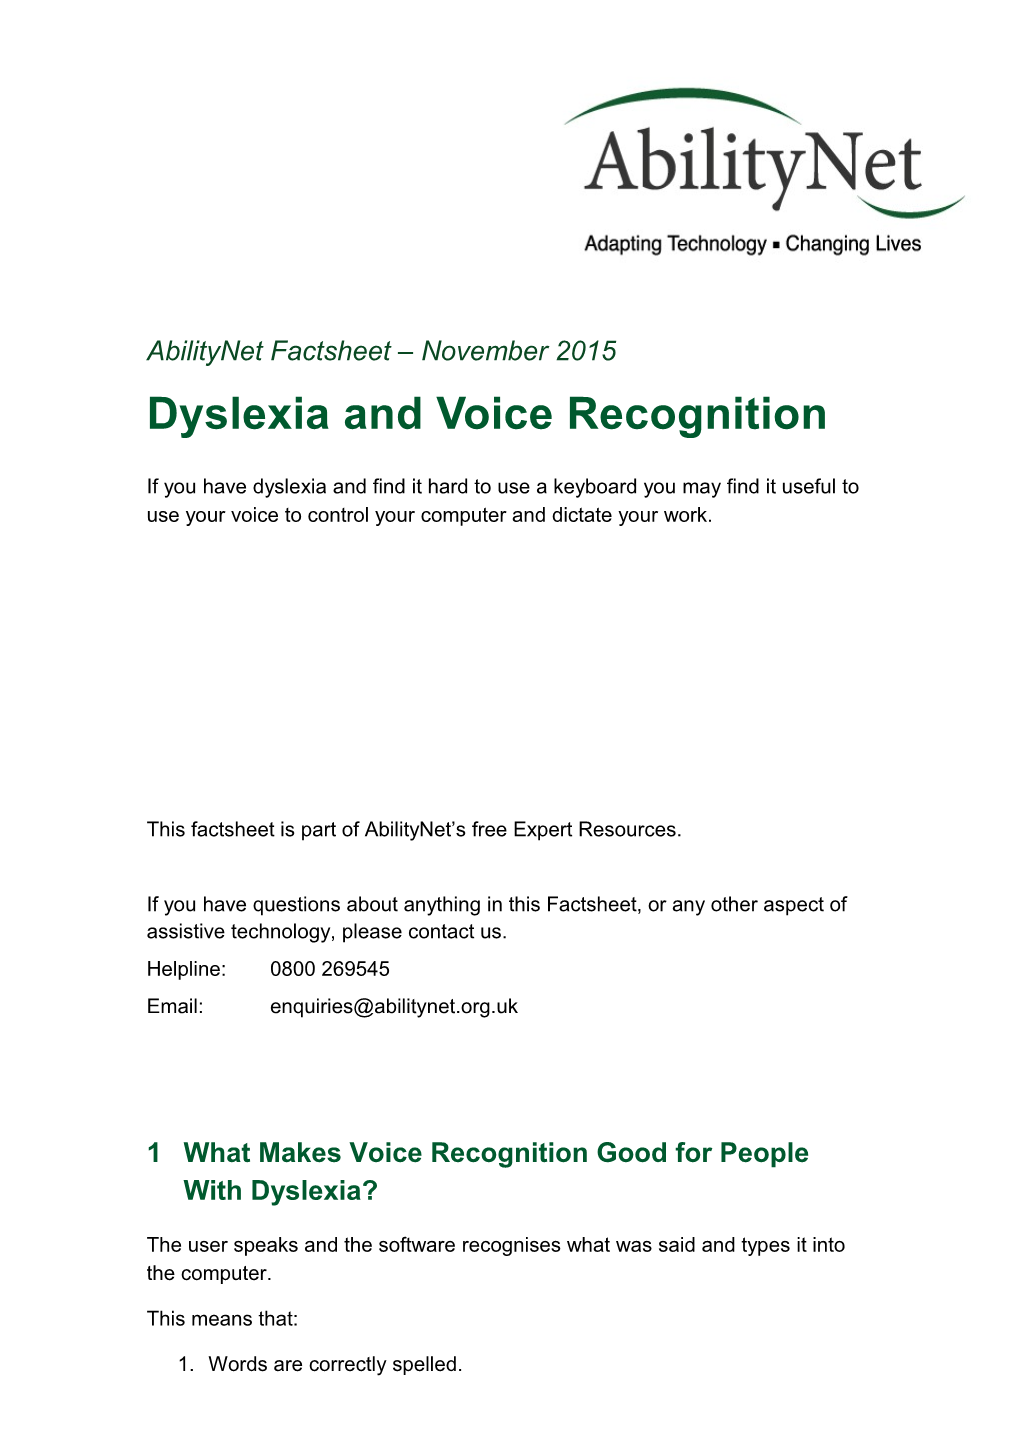 Dyslexia and Voice Recognition